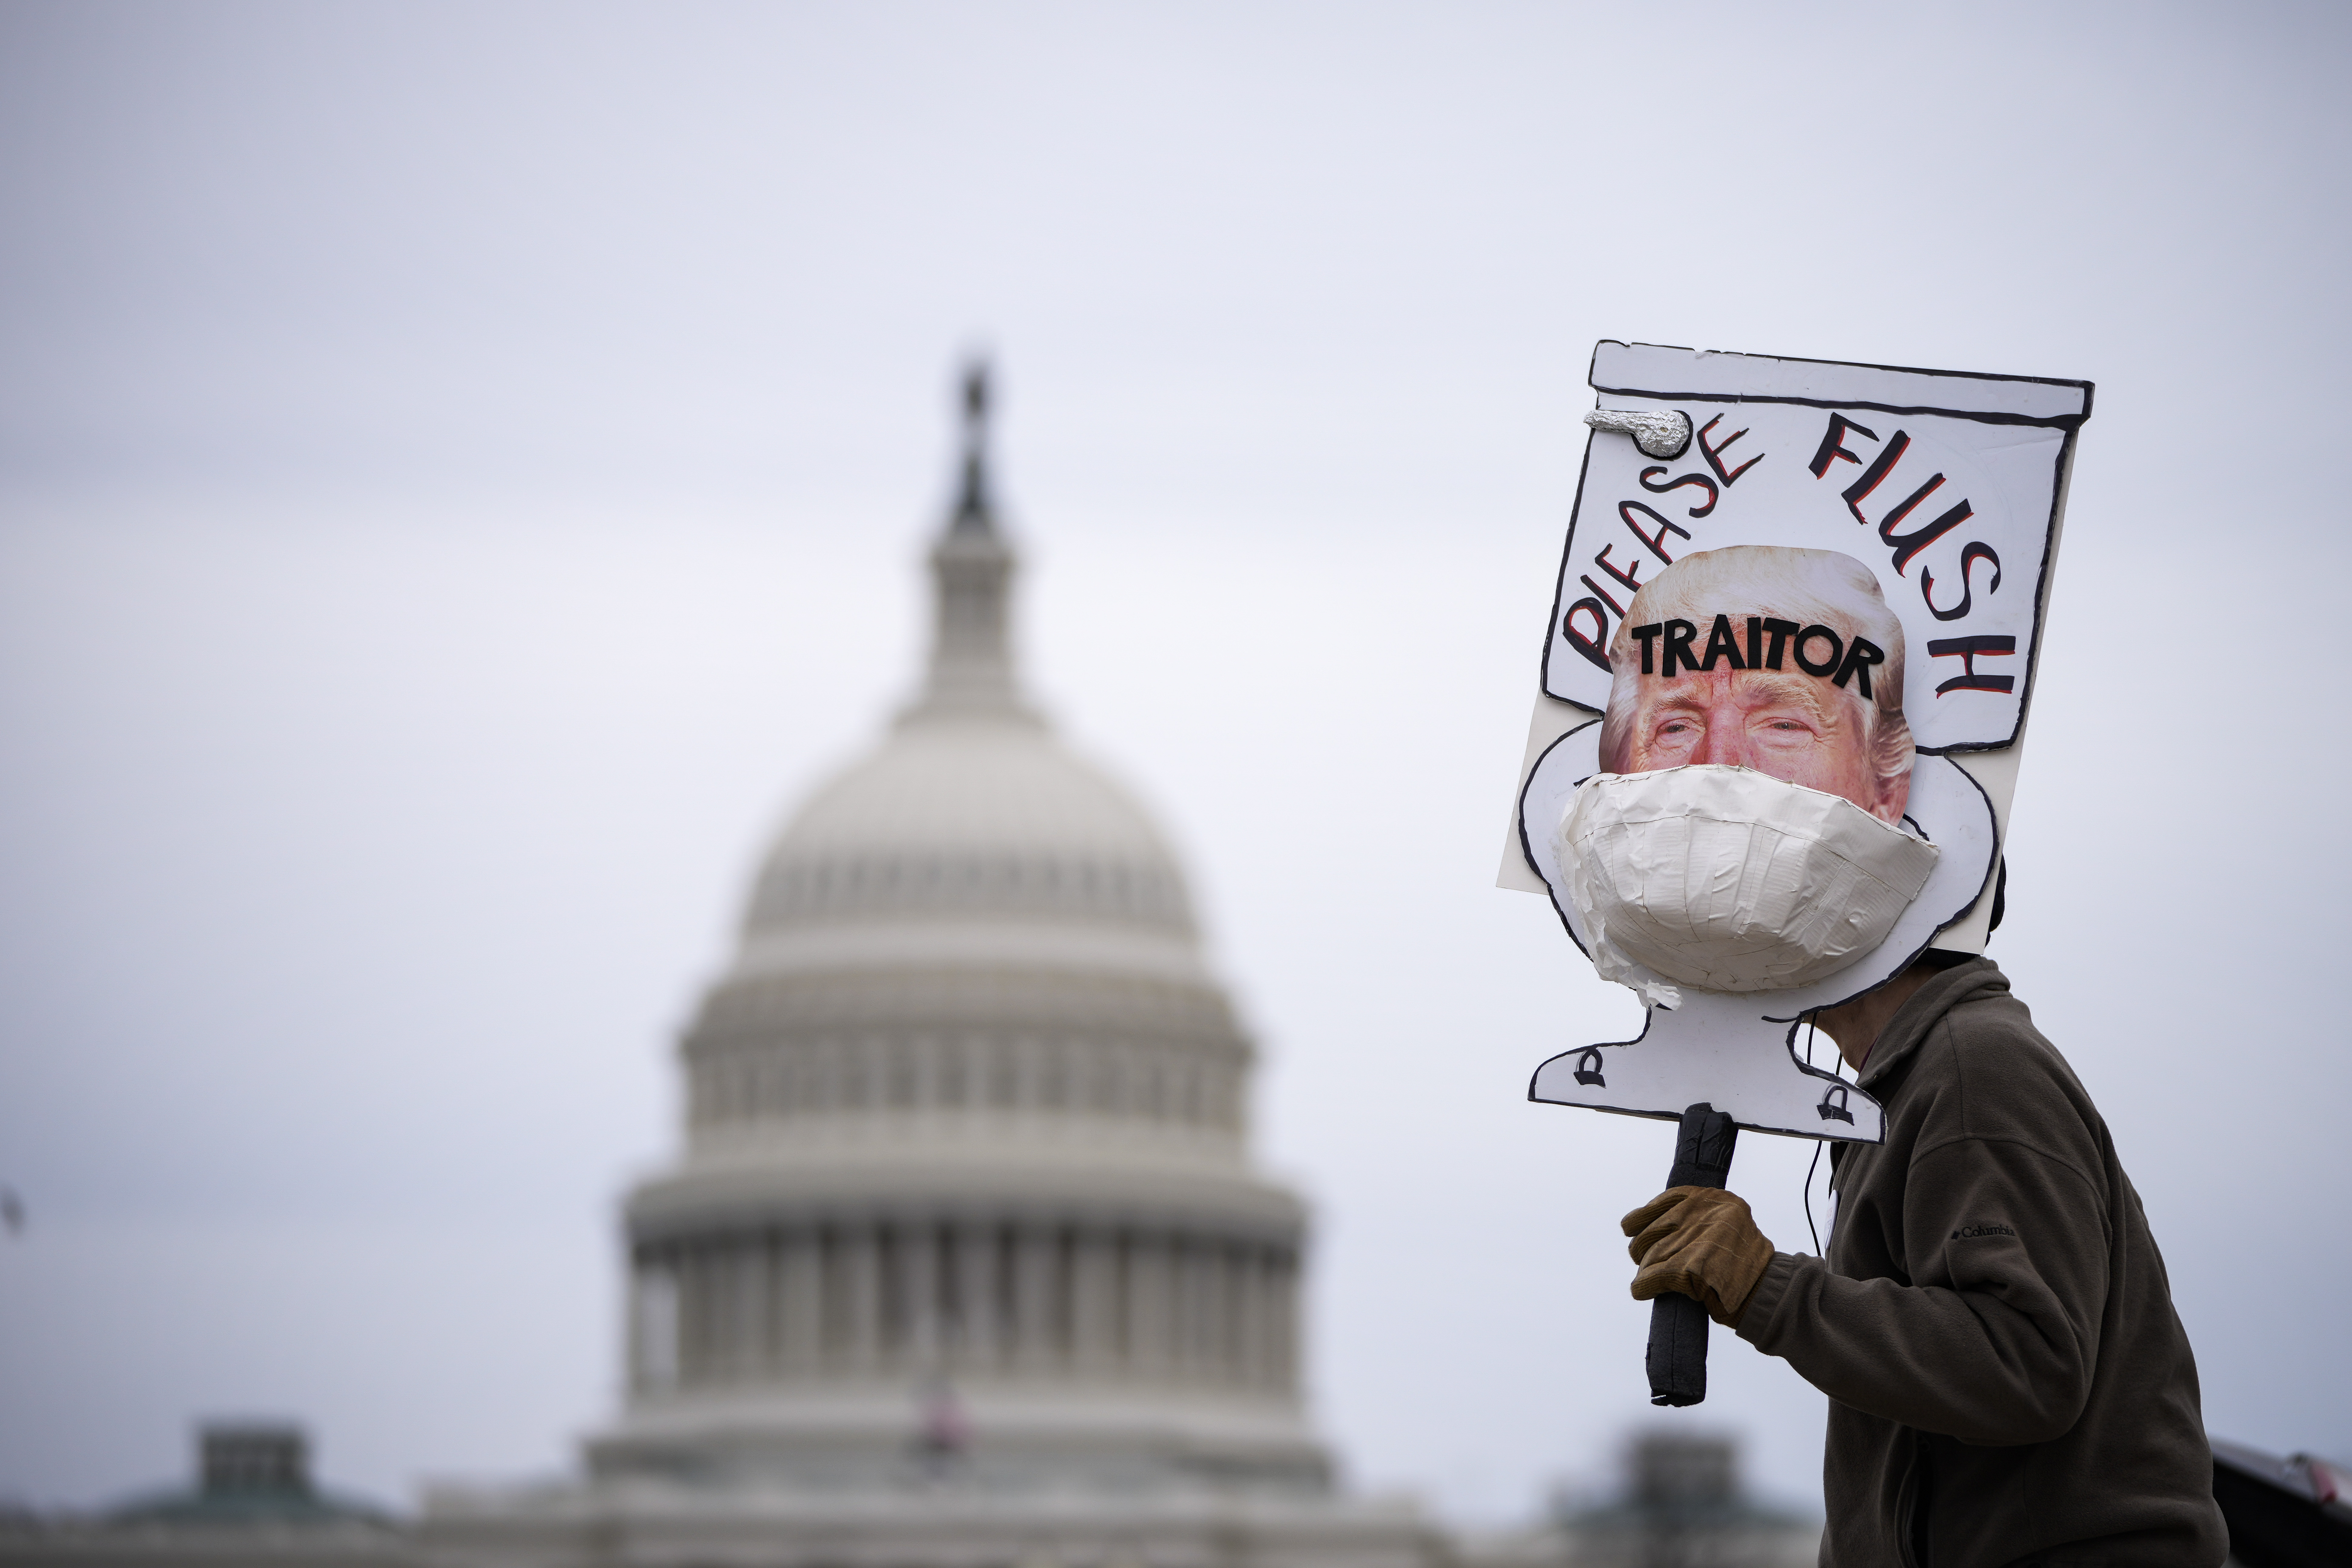 Bill Wood demonstrates with an anti-Trump sign near the U.S. Capitol on January 06, 2022 in Washington, DC. One year ago, supporters of President Donald Trump attacked the U.S. Capitol Building in an attempt to disrupt a congressional vote to confirm the electoral college win for Joe Biden. (Photo by Drew Angerer/Getty Images)